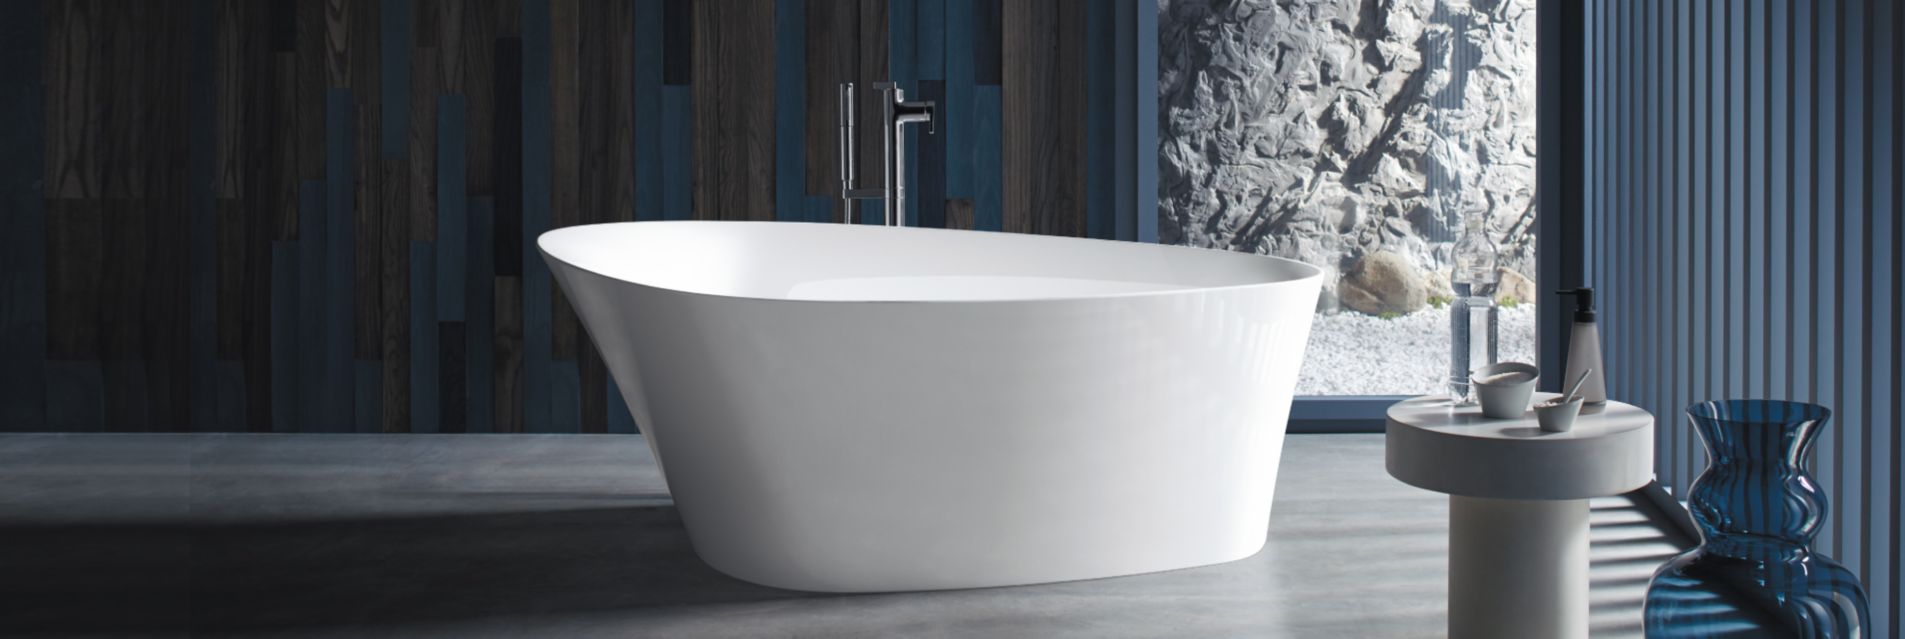 Bathtubs Buying Guide